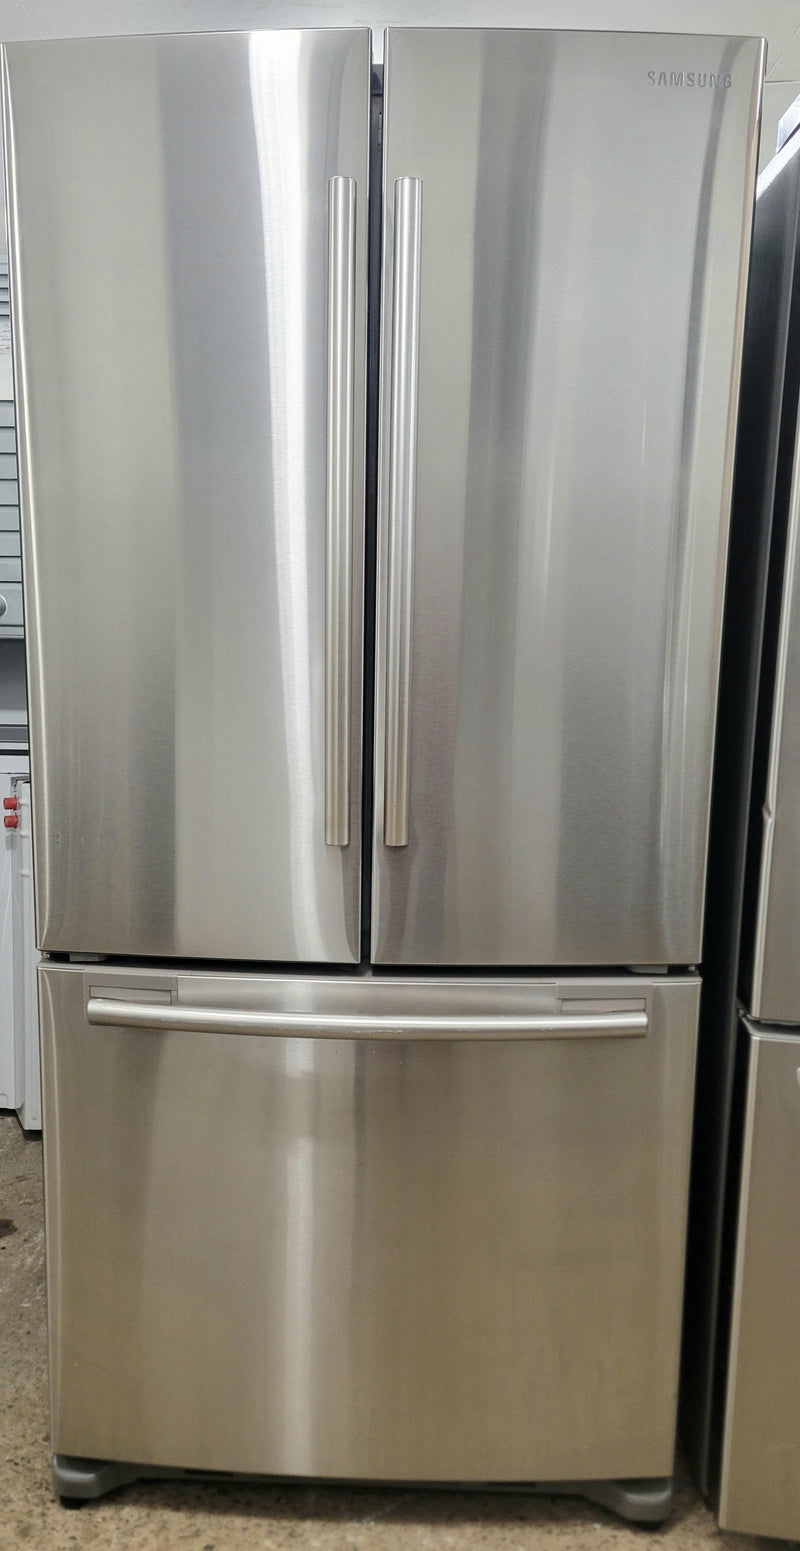 Samsung 33'' Wide Stainless Steel French Door Fridge with Ice Maker, Free 60 Day Warranty